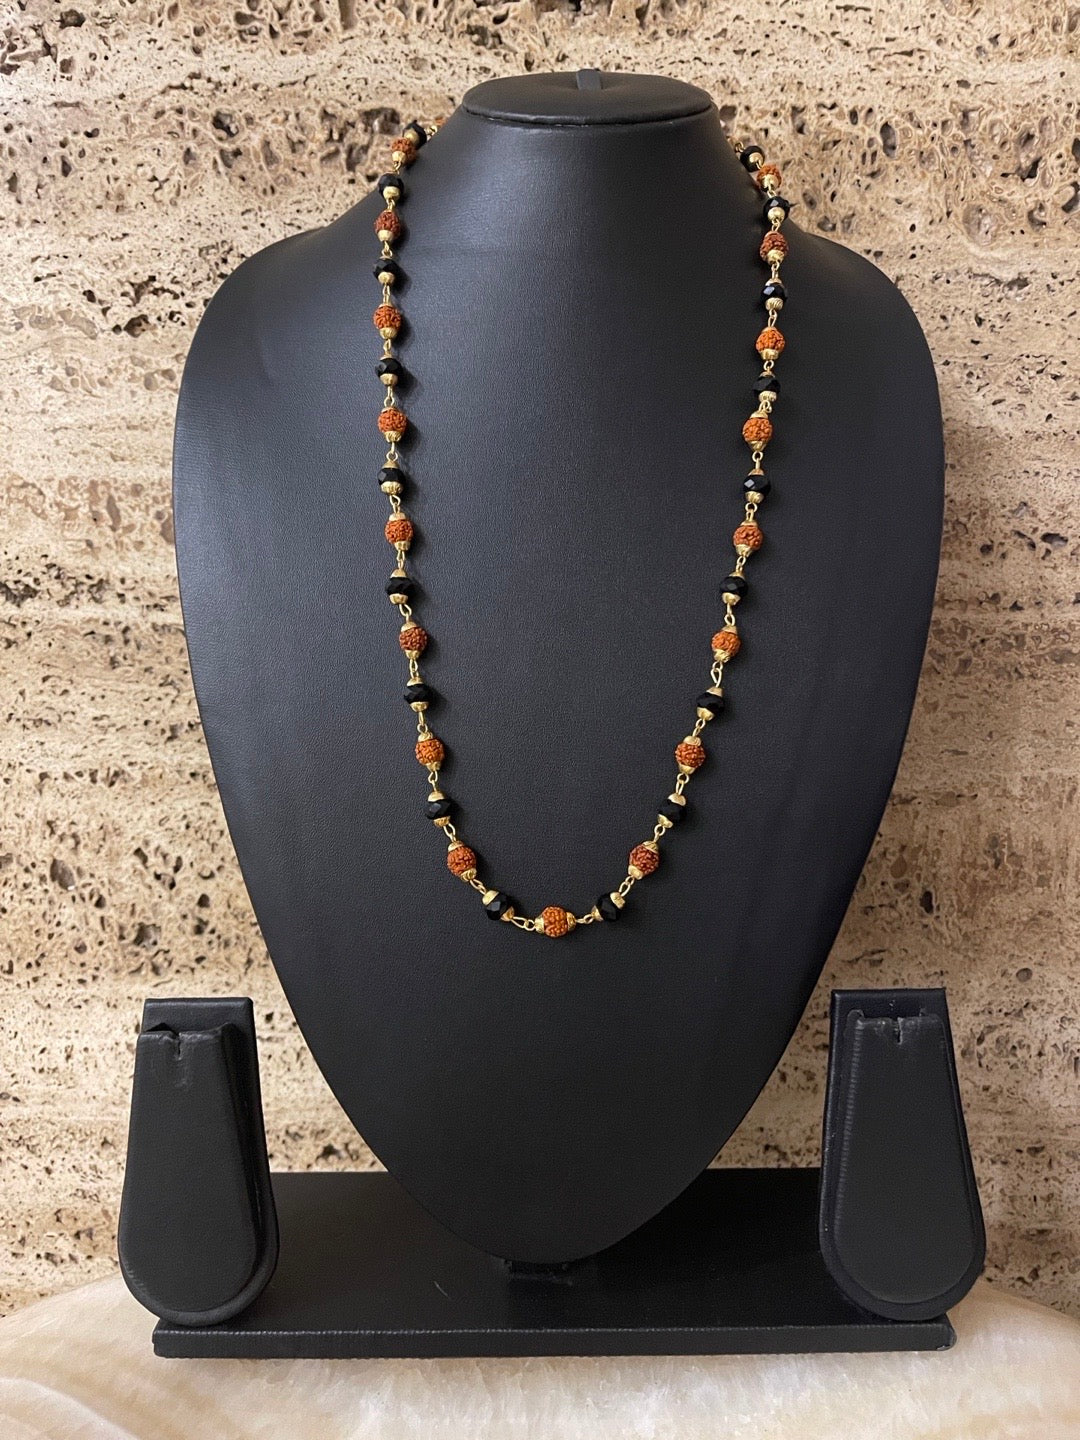 Faceted Black Diamond Beads Necklace In AAA Quality With Gold Clasp